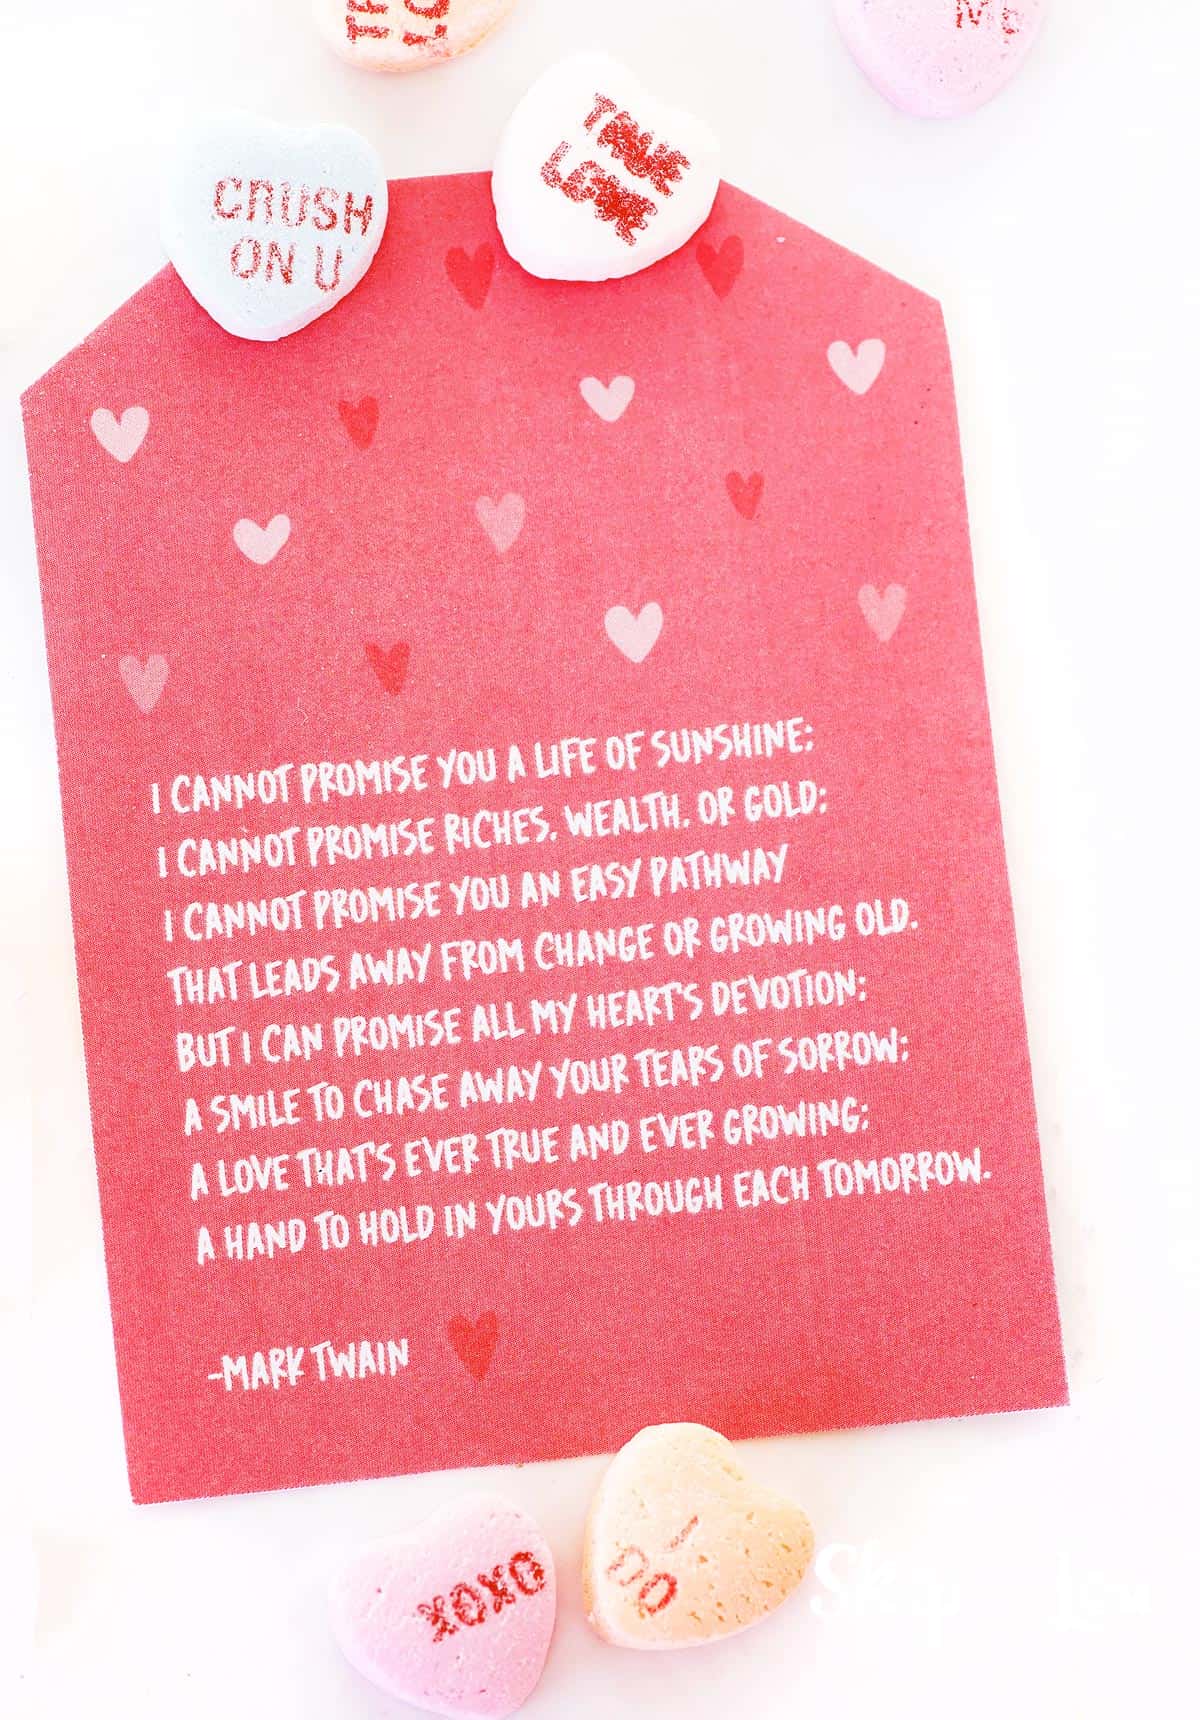 mark twain poem on pink tag for promise day